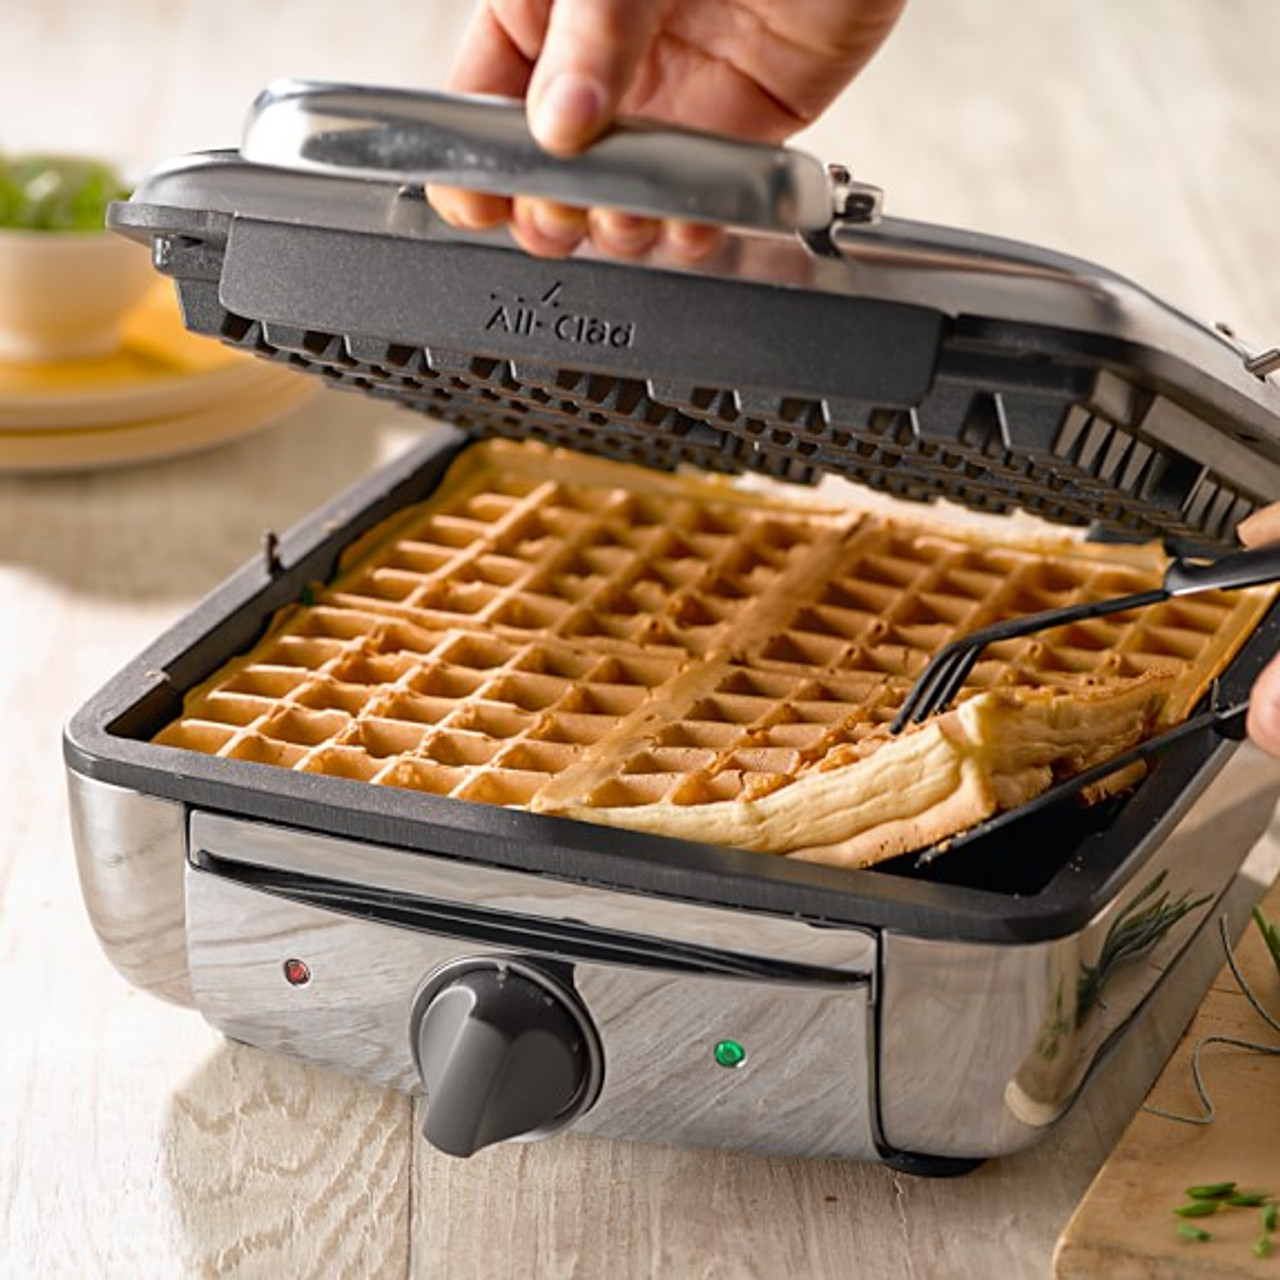 https://cdn11.bigcommerce.com/s-hccytny0od/images/stencil/1280x1280/products/3105/11007/all-clad-4-slice-belgian-waffle-maker-1__45040.1588609831.jpg?c=2?imbypass=on